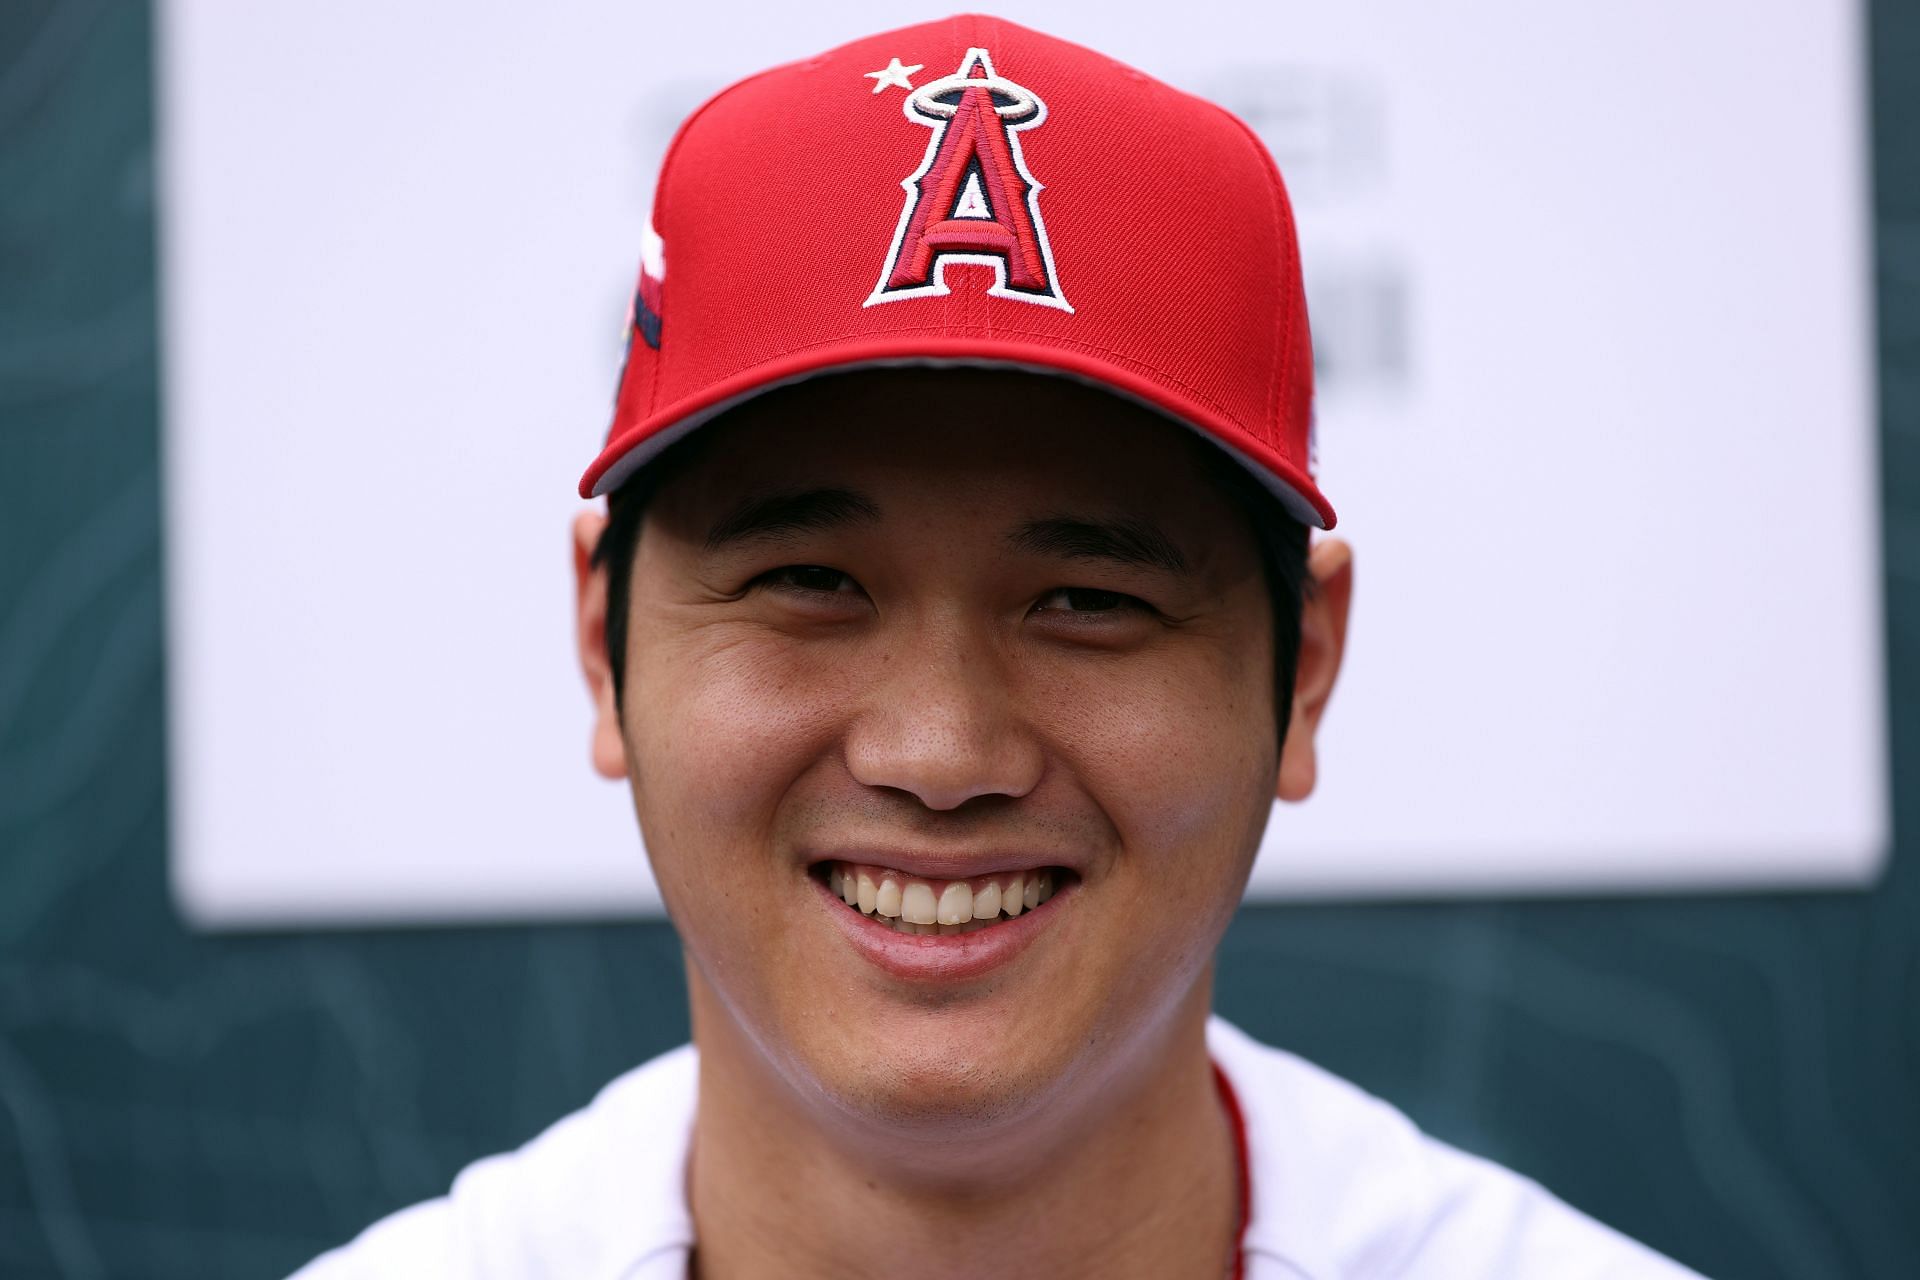 Shohei Ohtani of the Los Angeles Angels speaks to the media during Gatorade All-Star Workout Day at T-Mobile Park on Monday in Seattle, Washington.